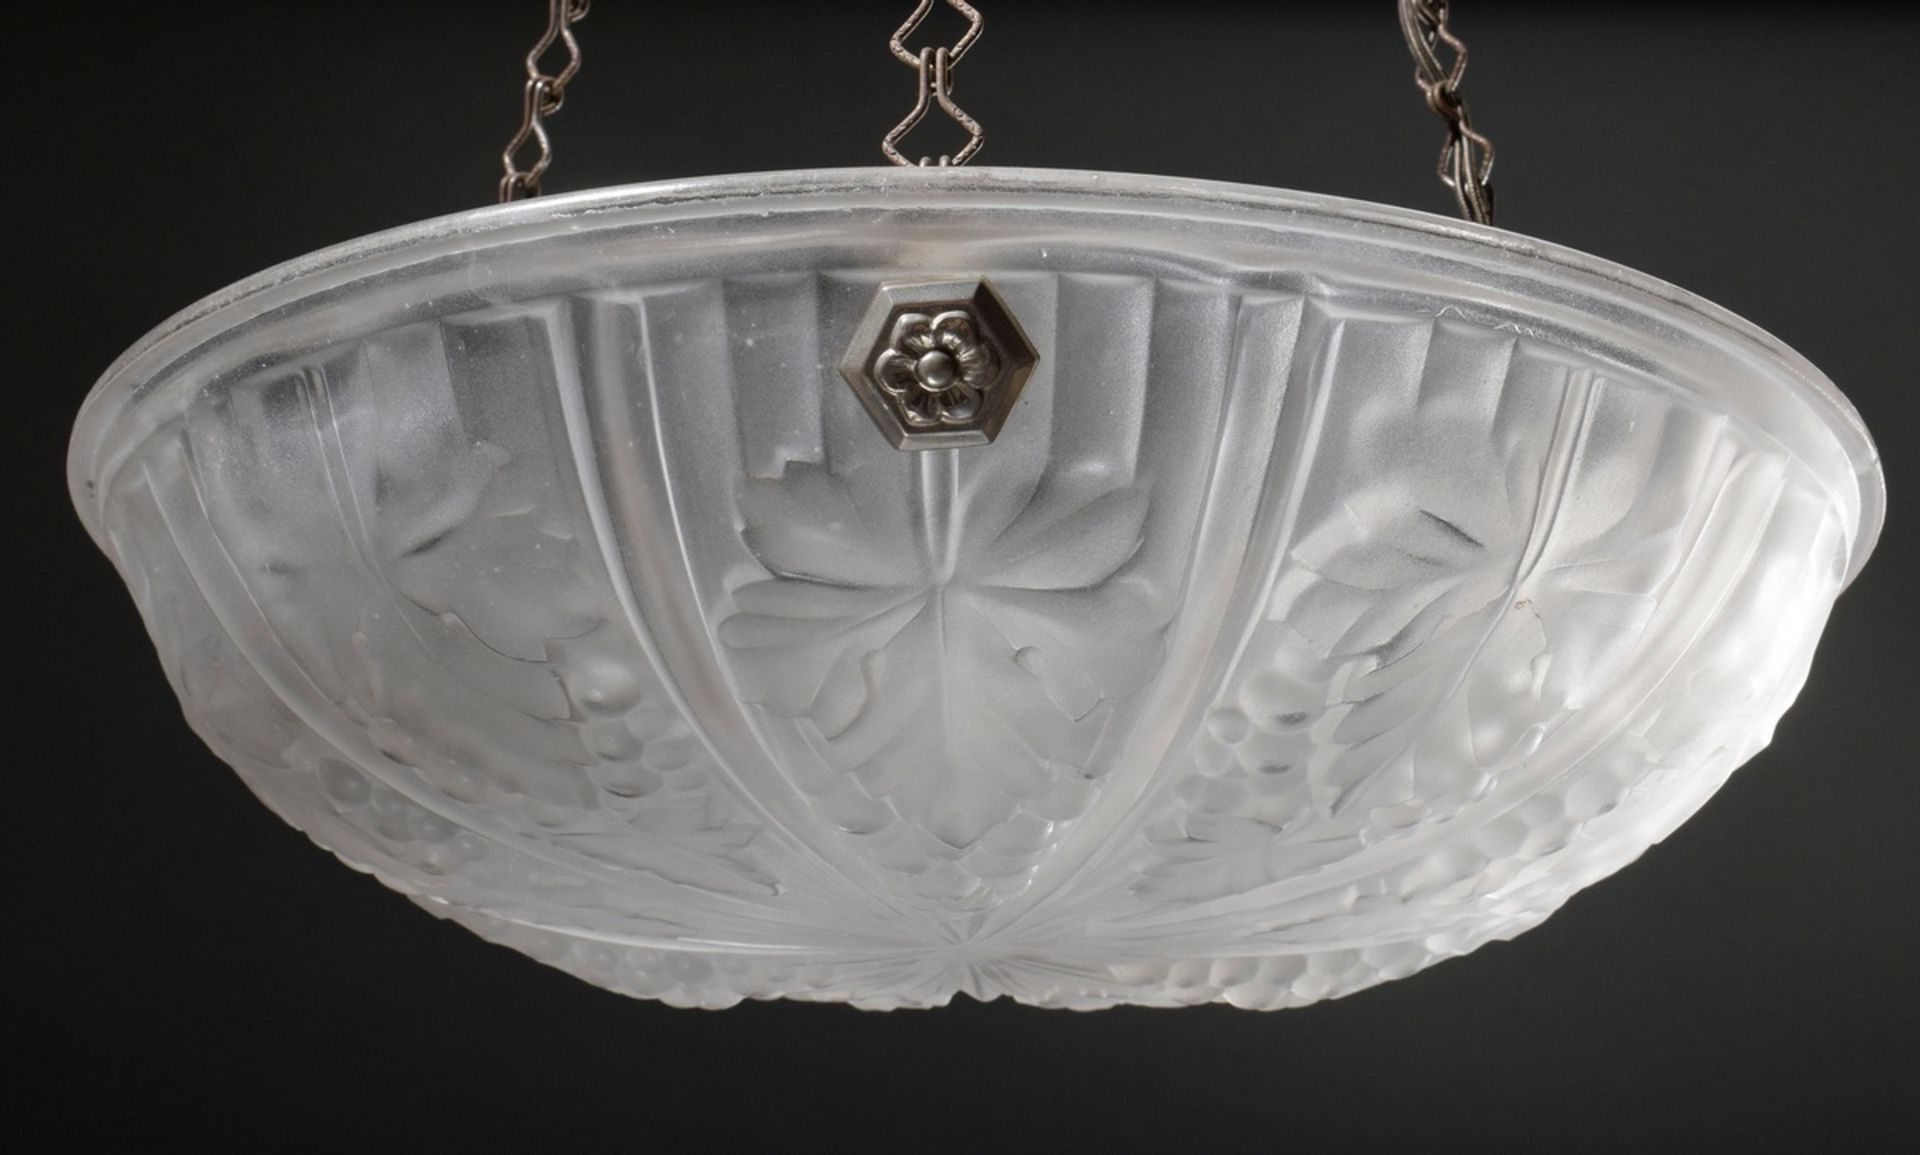 Art Deco ceiling lamp with satinised pressed glass bowl "vine leaves" decor on chromed metal frame, - Image 3 of 4